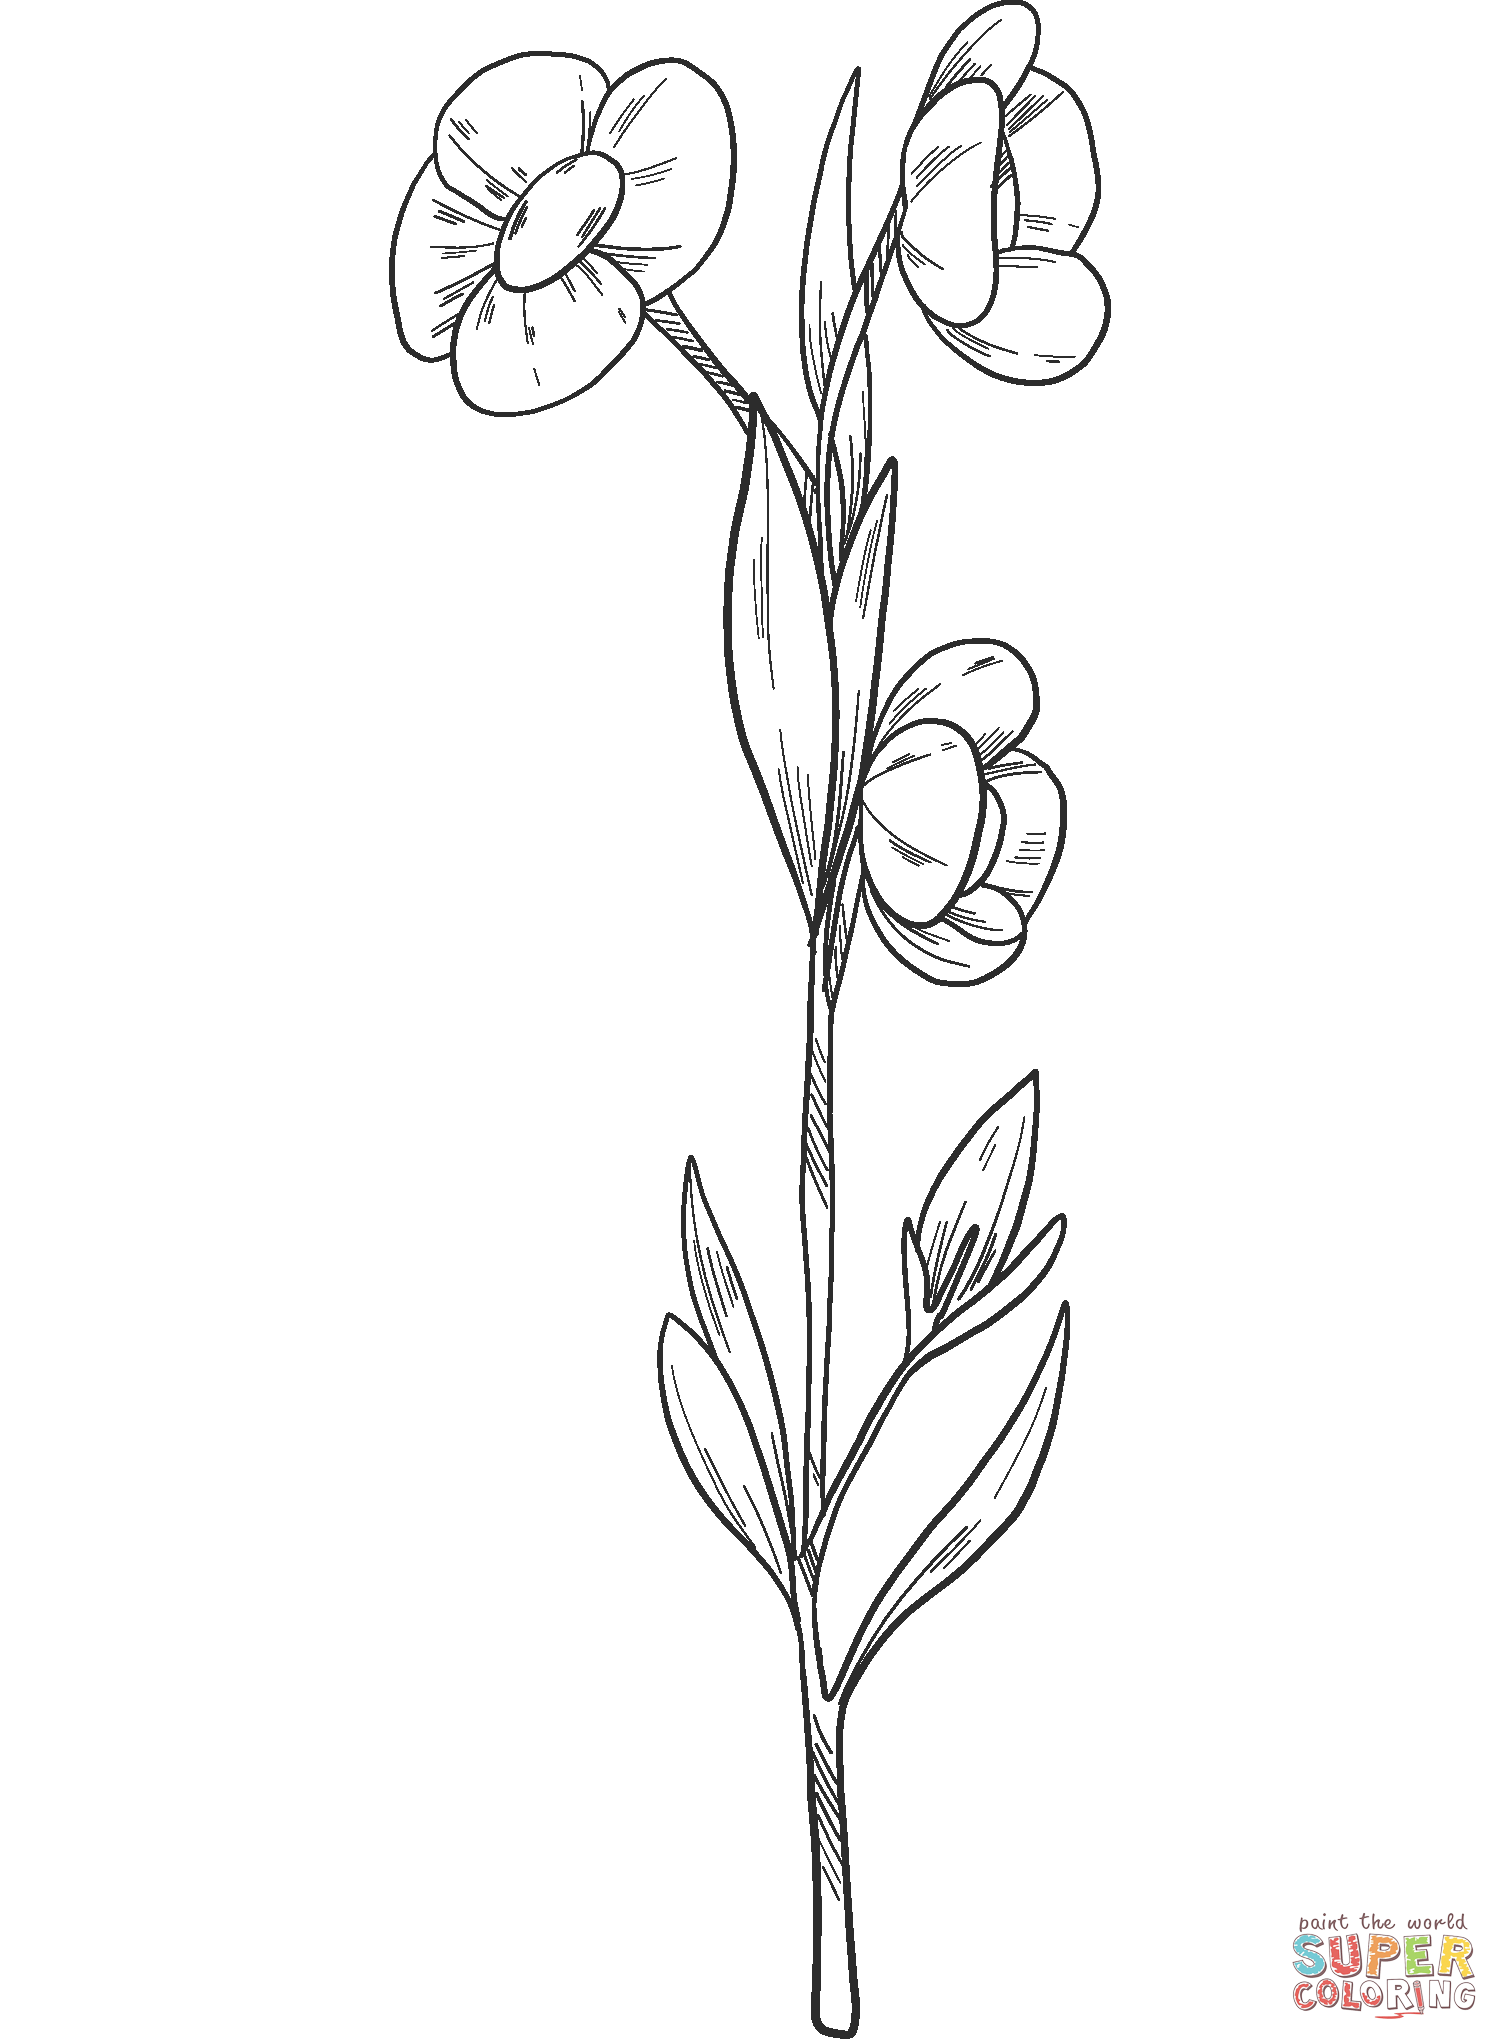 Wildflowers coloring page | Free Printable Coloring Pages